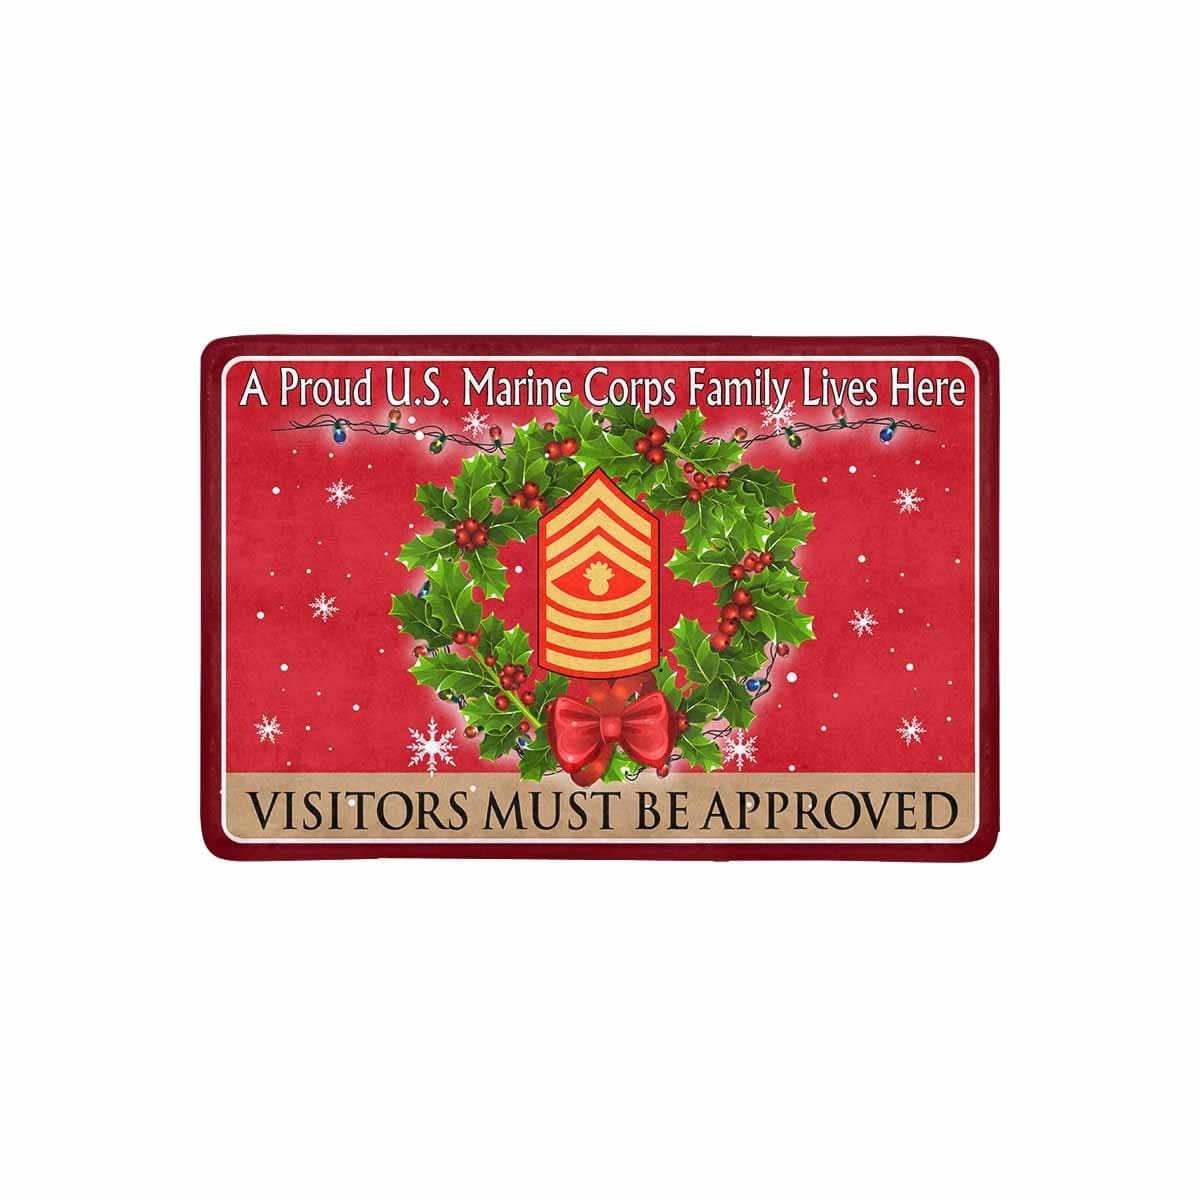 USMC E-9 Master Gunnery Sergeant E9 MGySg USMC Staff Noncommissioned Officer Ranks - Visitors must be approved-Doormat-USMC-Ranks-Veterans Nation